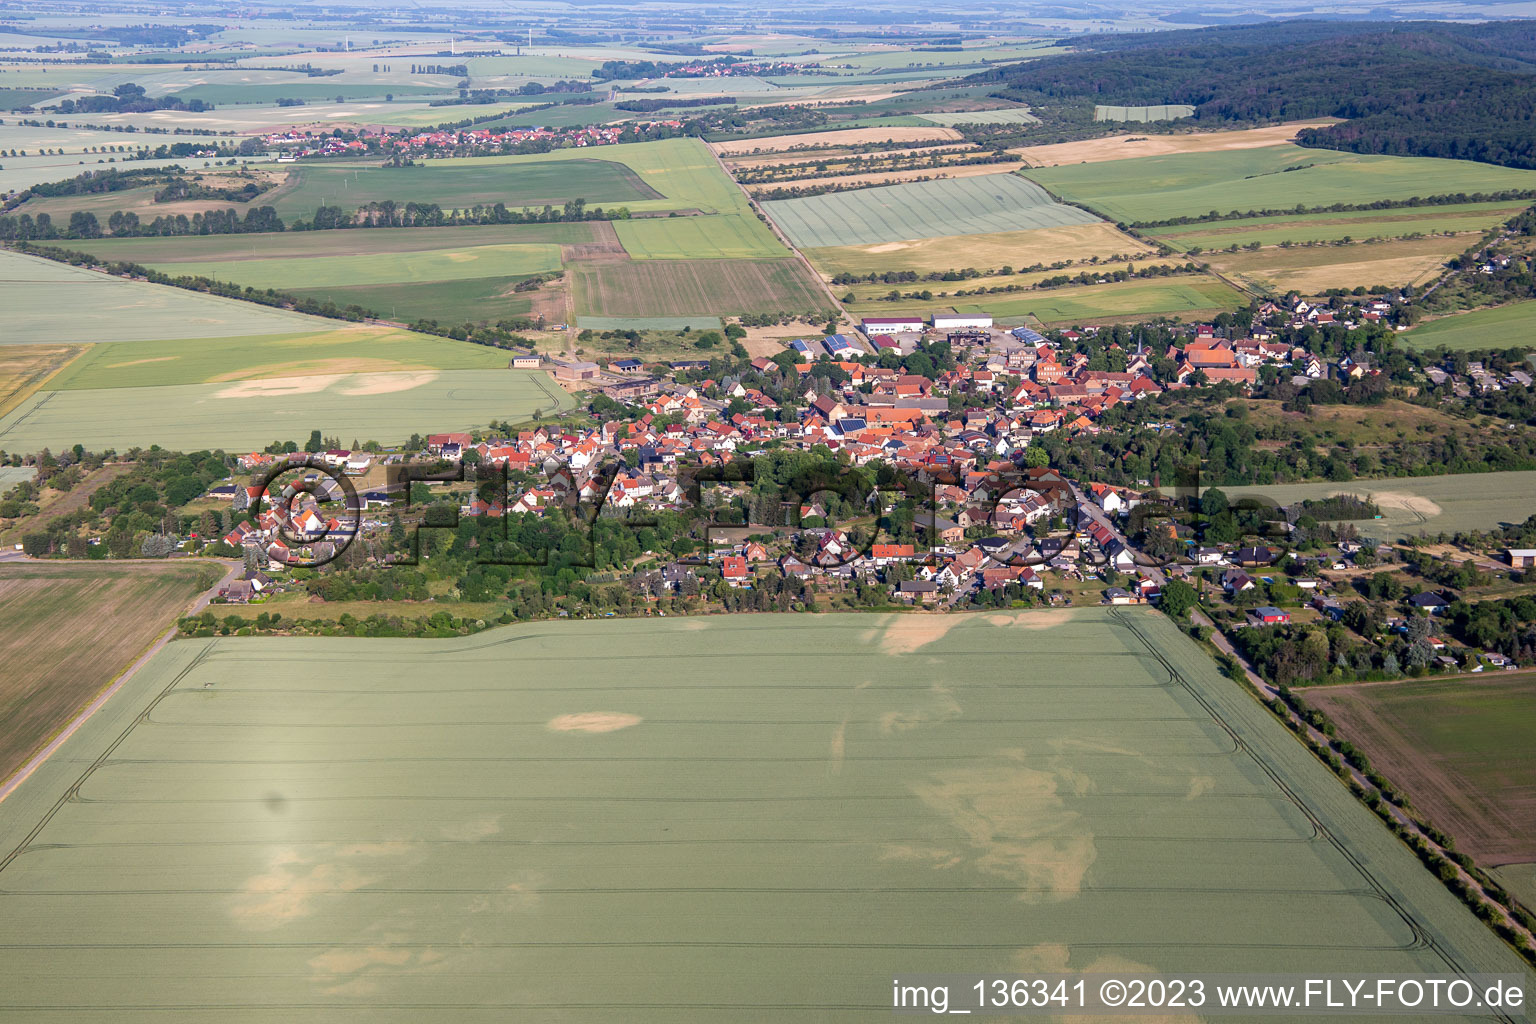 From the east in the district Sargstedt in Halberstadt in the state Saxony-Anhalt, Germany